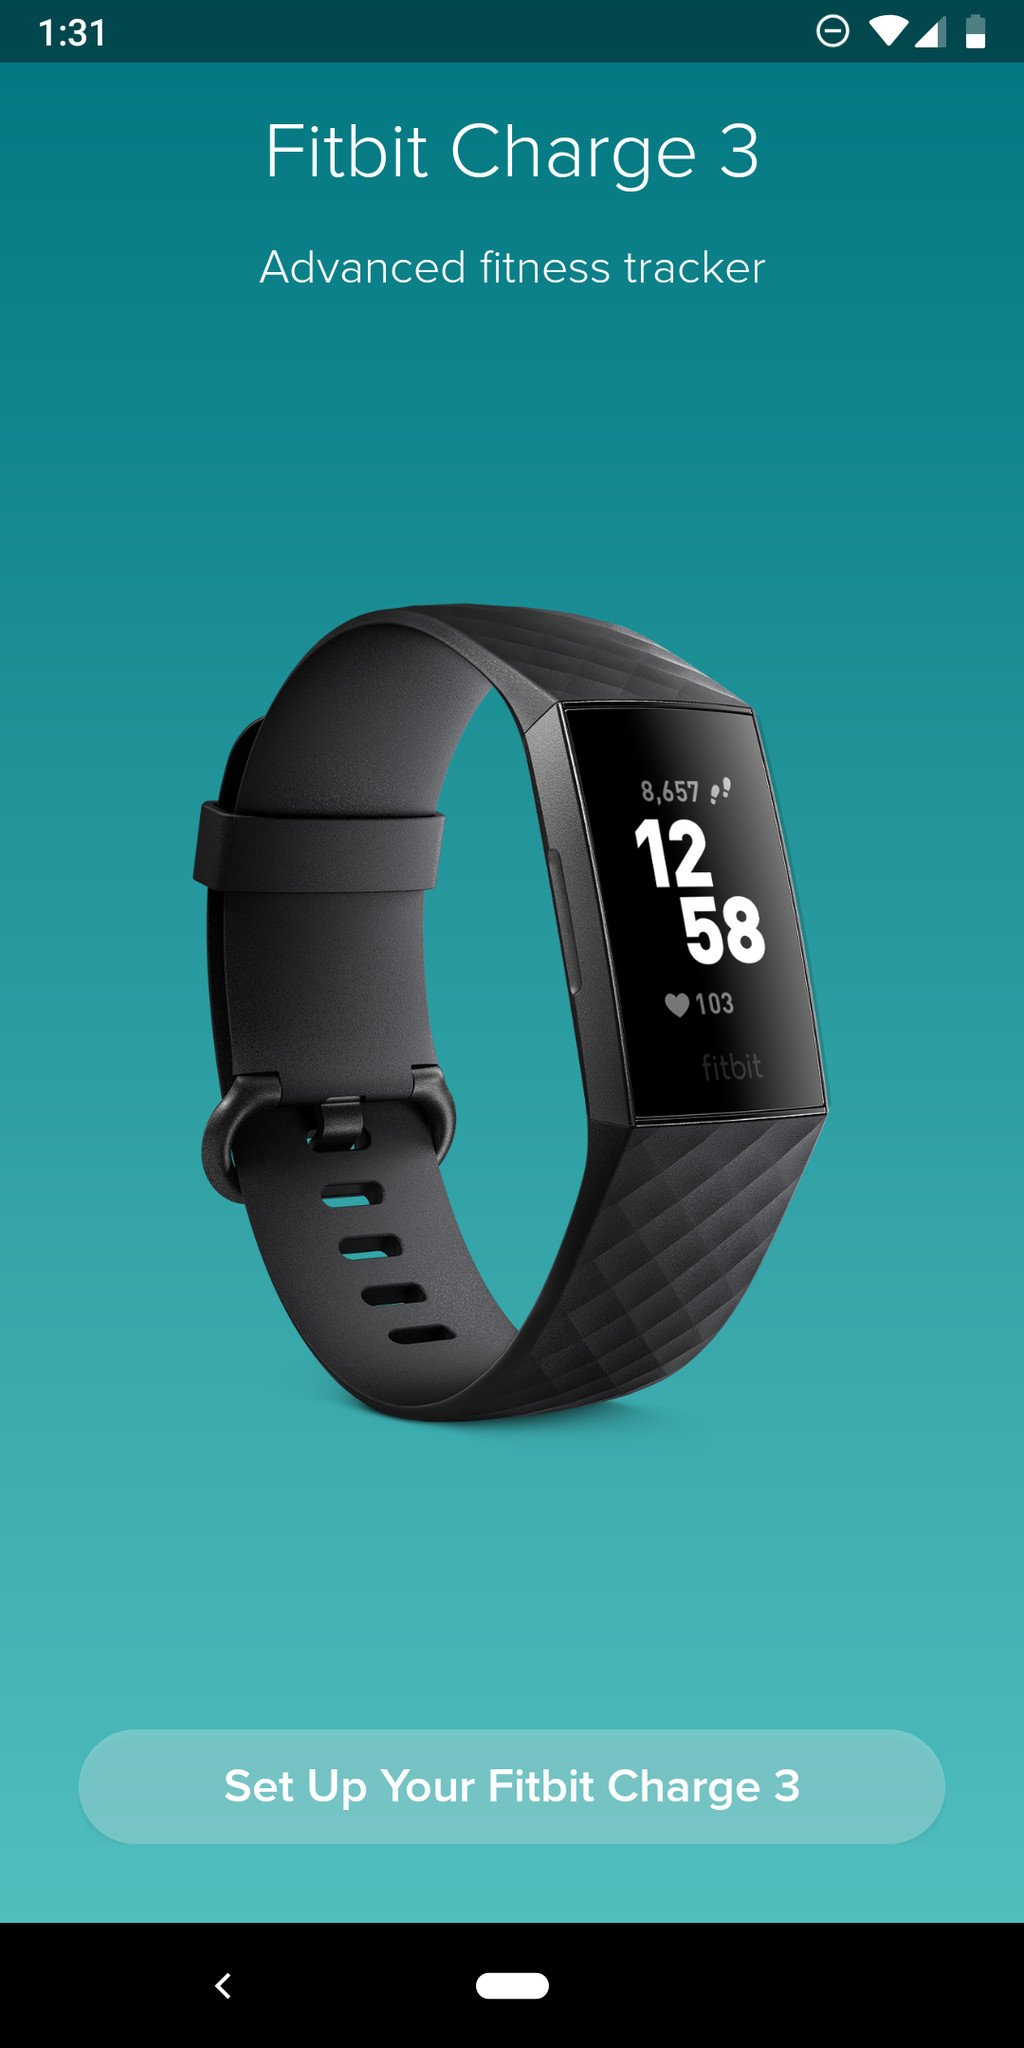 how do you set up a fitbit charge 3